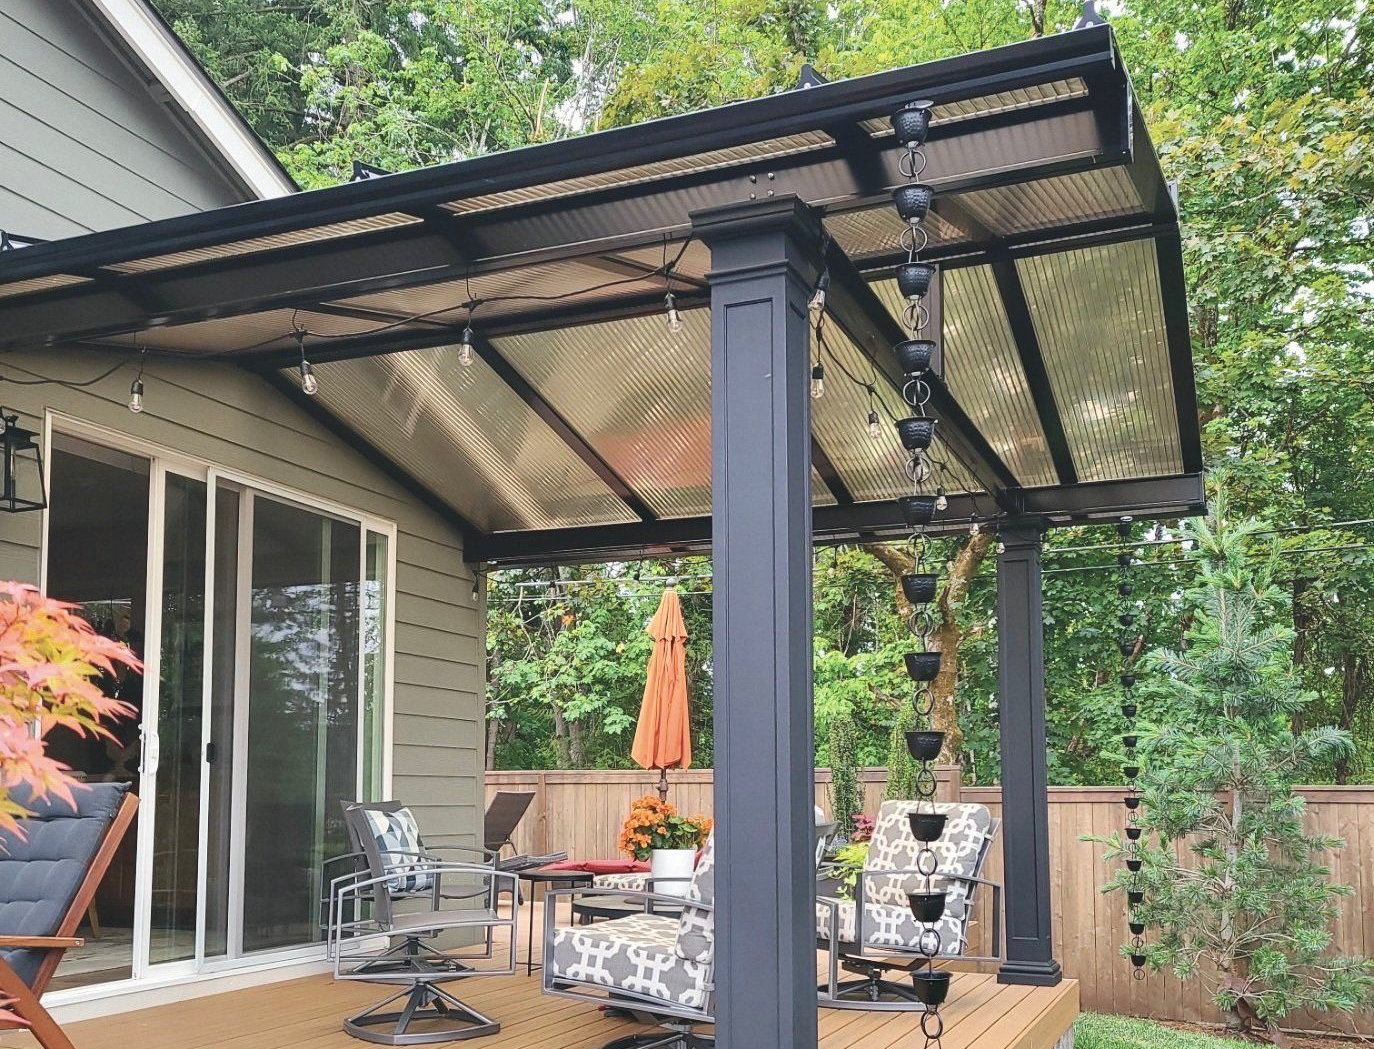 Patio Covers in Camas Washington - Gable Roof with ACRYLITE Acrylic